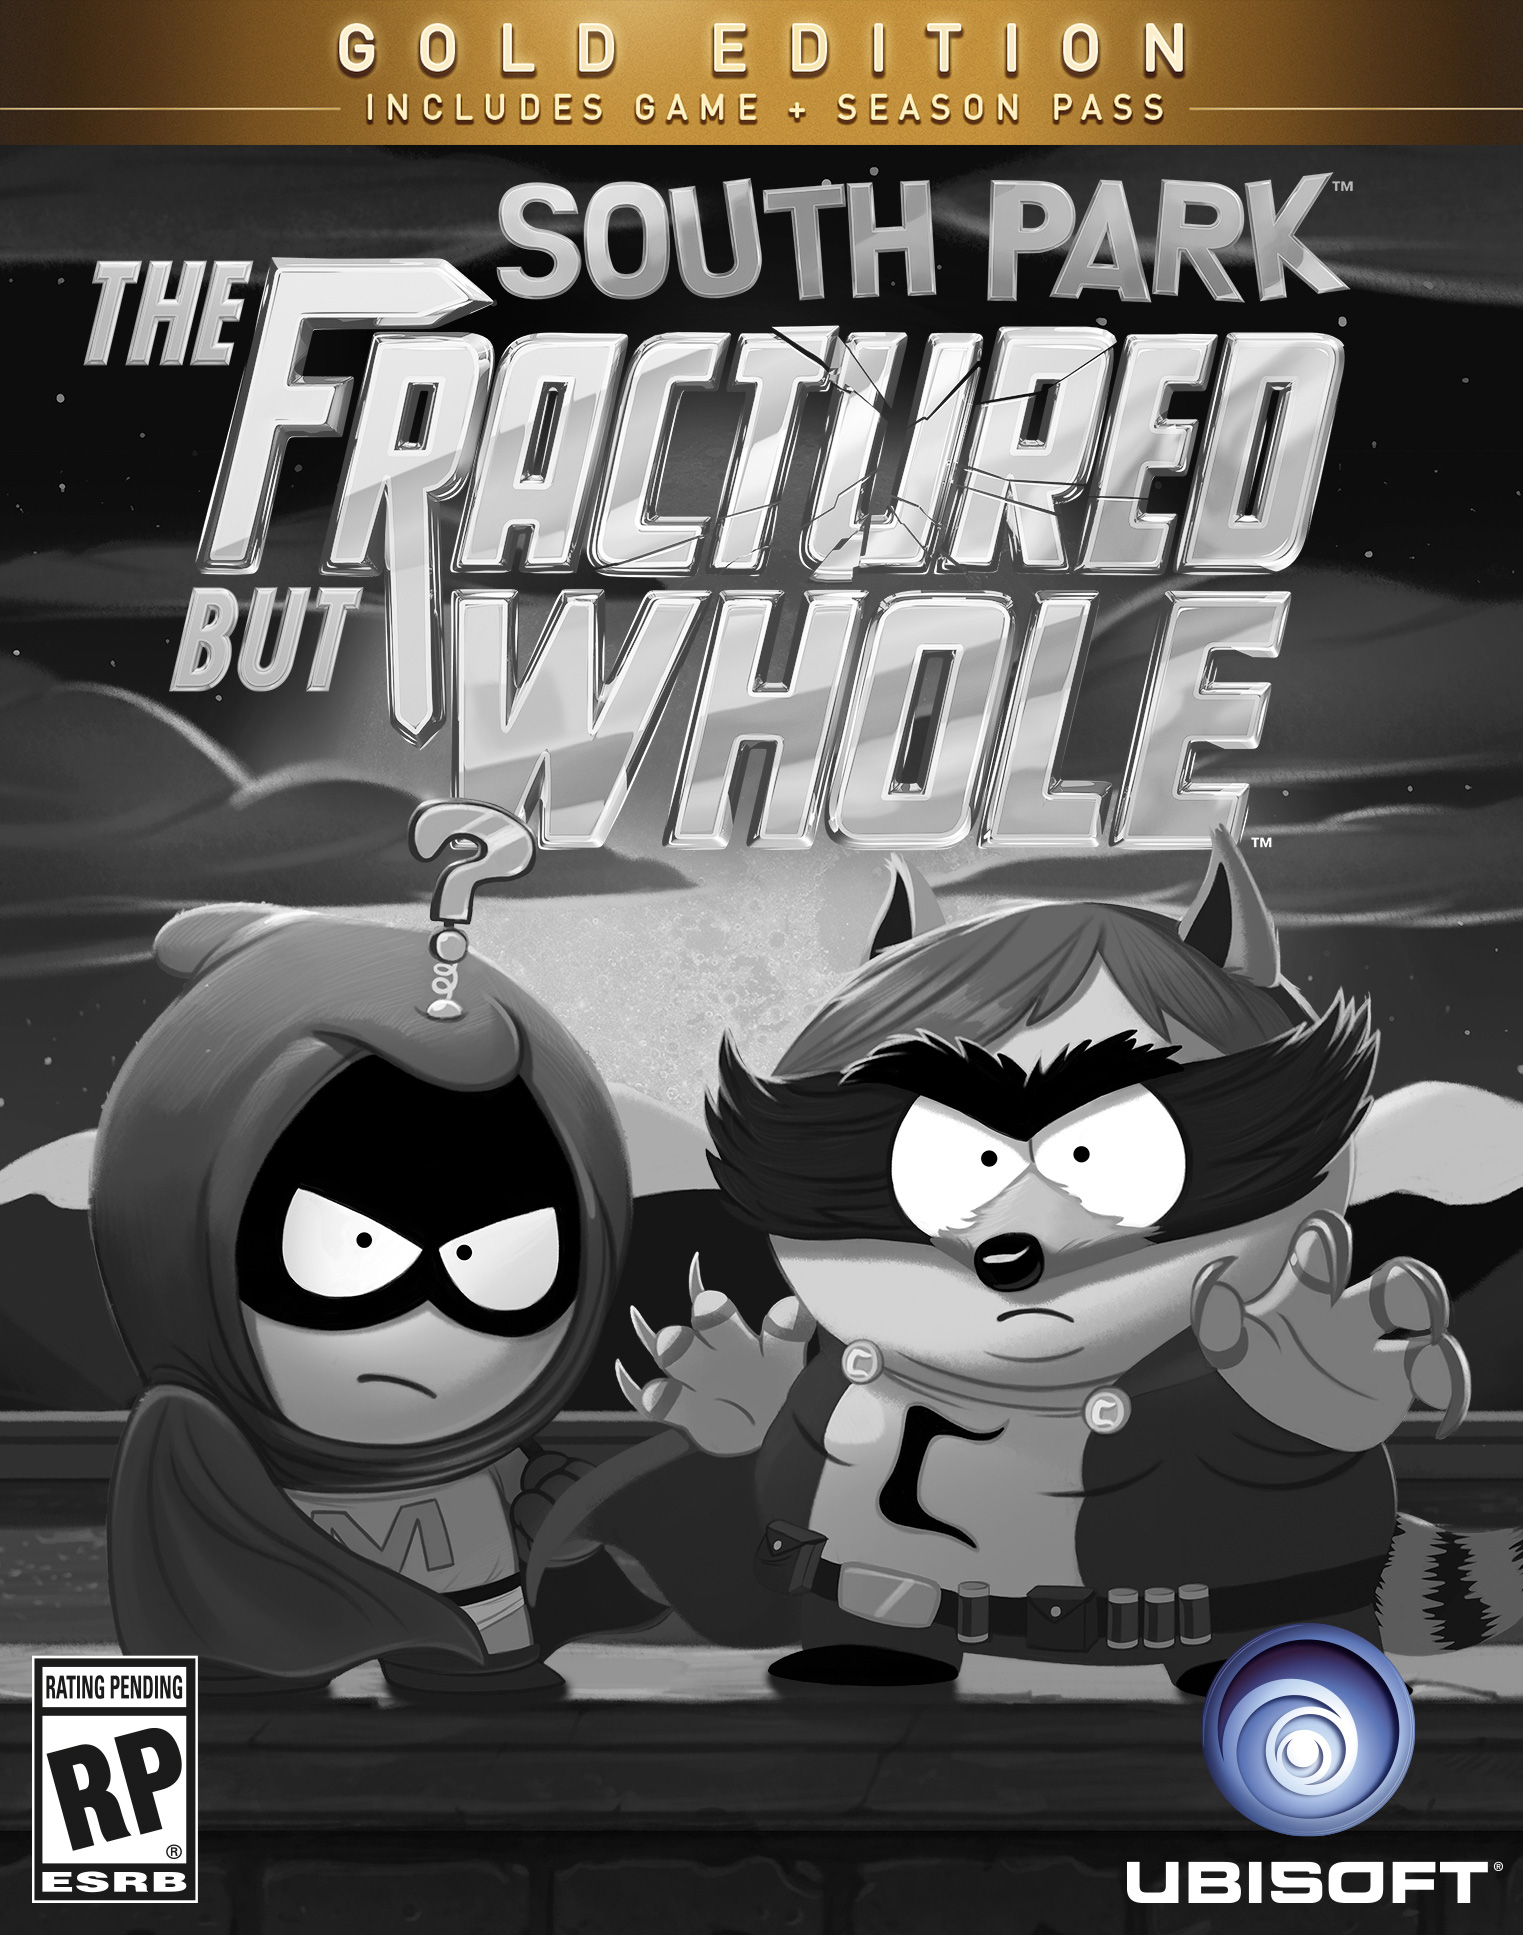 South park the fractured but whole купить ключ steam дешево фото 9